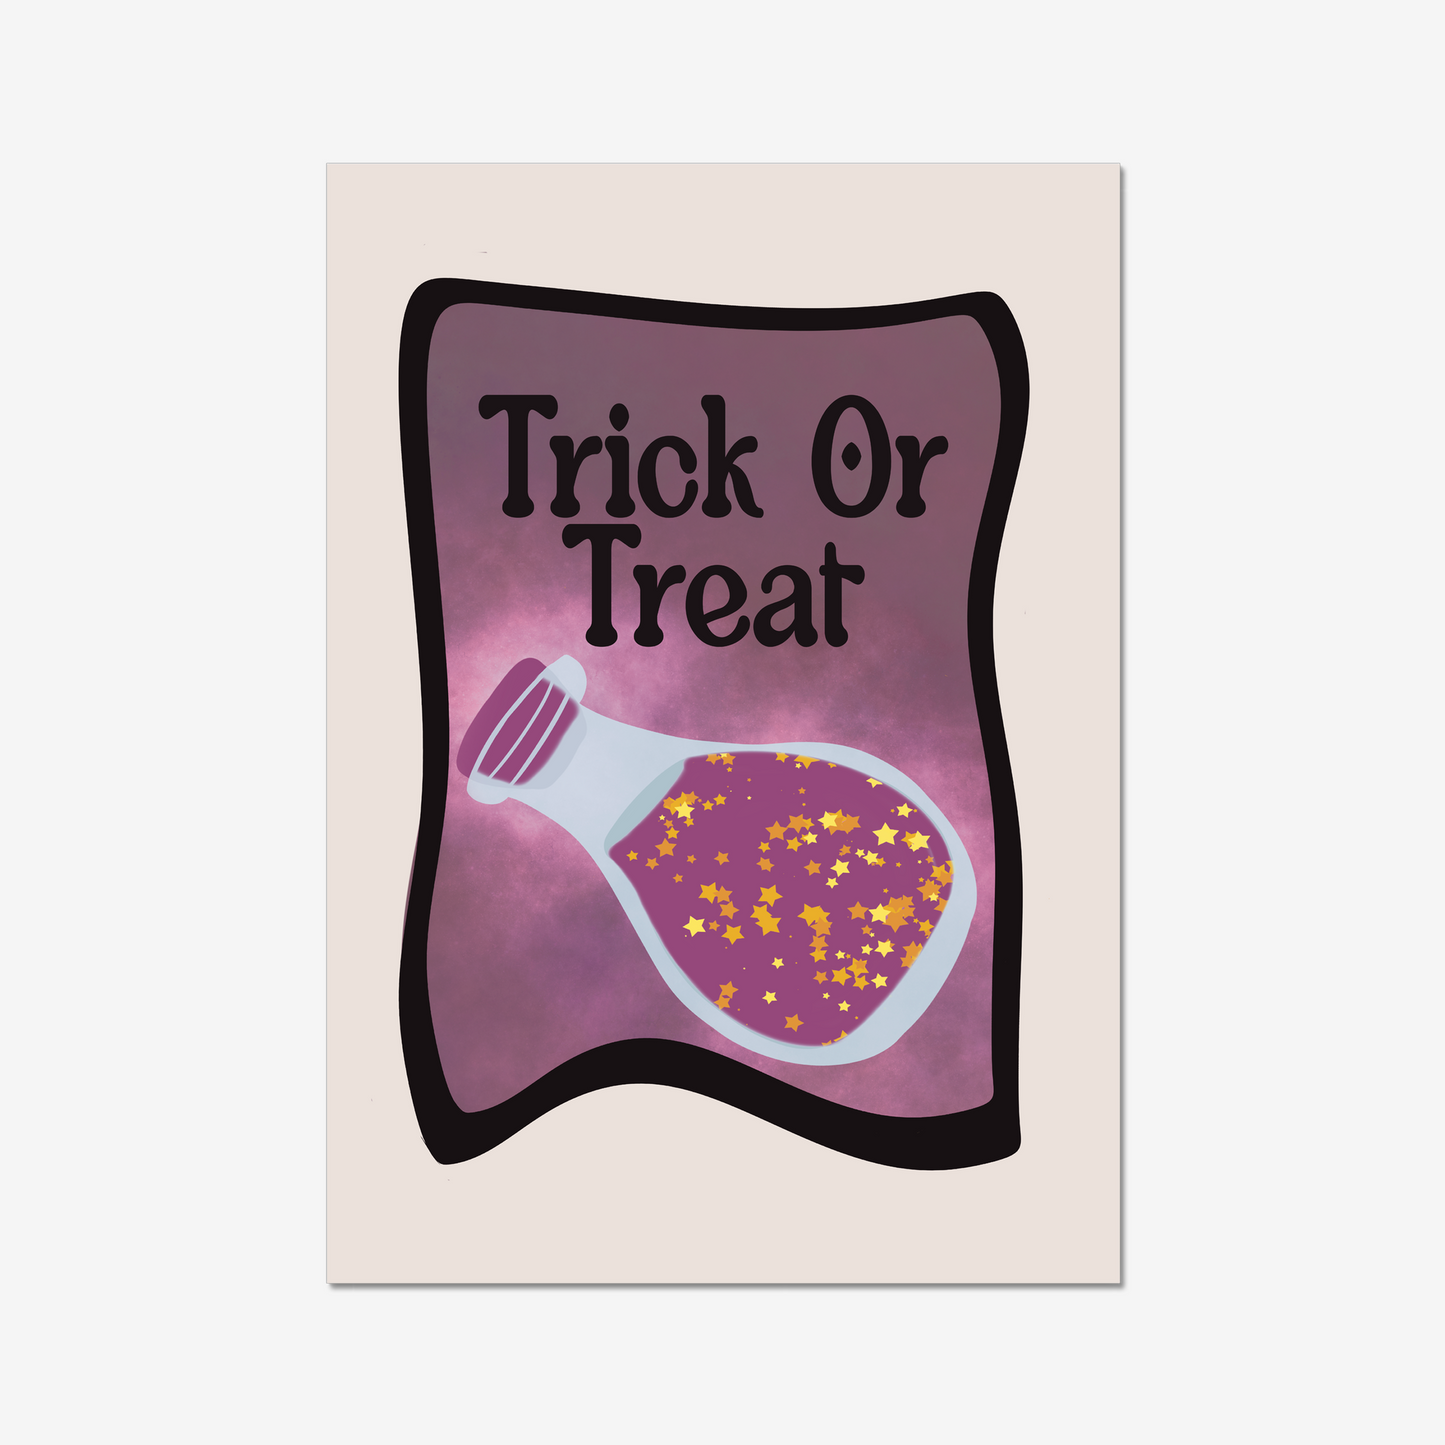 Add some magic to your home this Halloween with our Trick or Treat Art Print. Featuring a colourful potion bottle and mystical magic ingredients, this print is perfect for anyone who loves Halloween. So don't wait, get your hands on our Trick or Treat Art Print today!